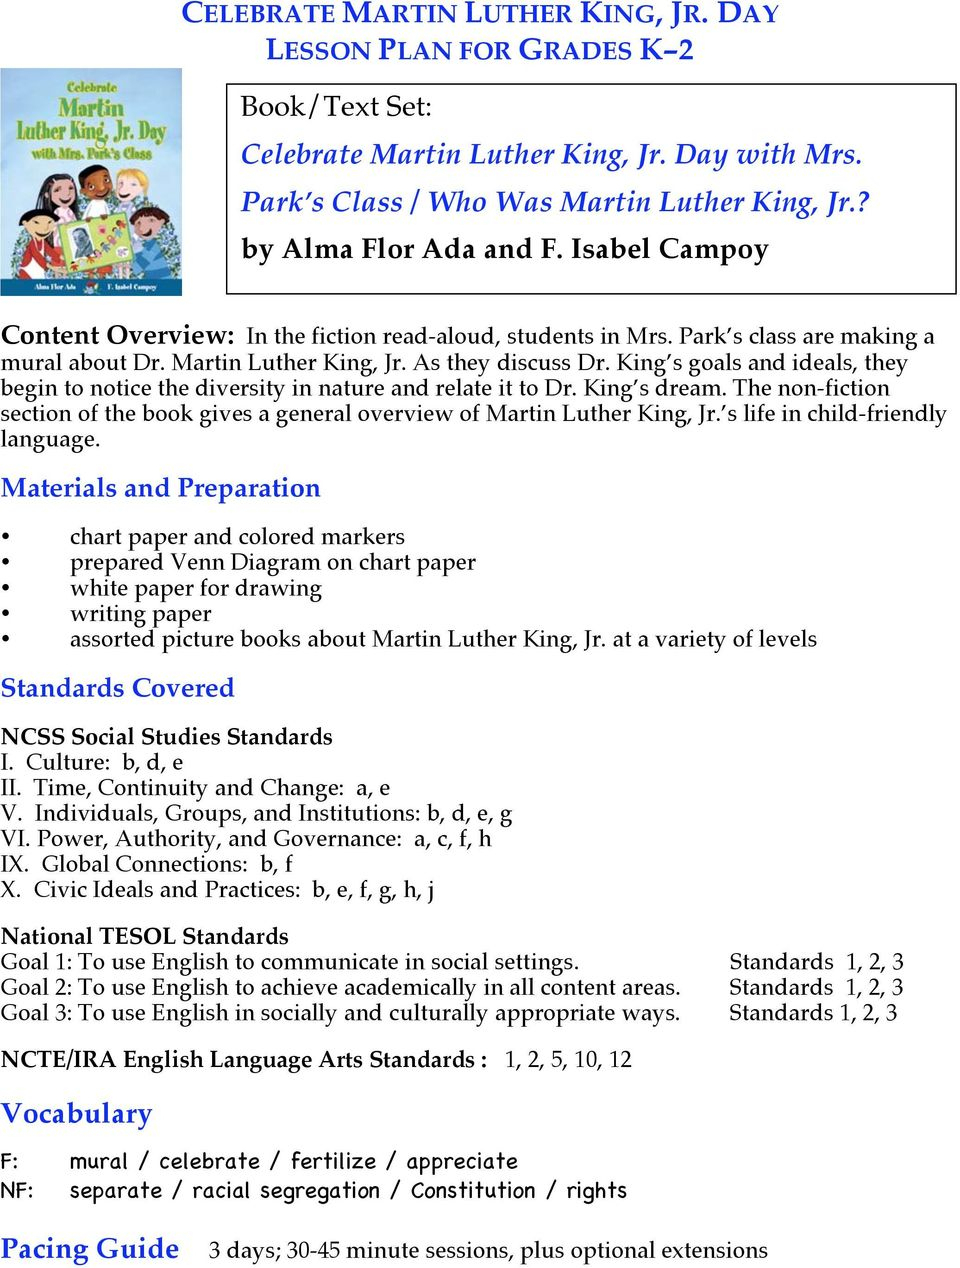 Wiki Pedia Martin Luther King Day: Martin Luther King Jr Day